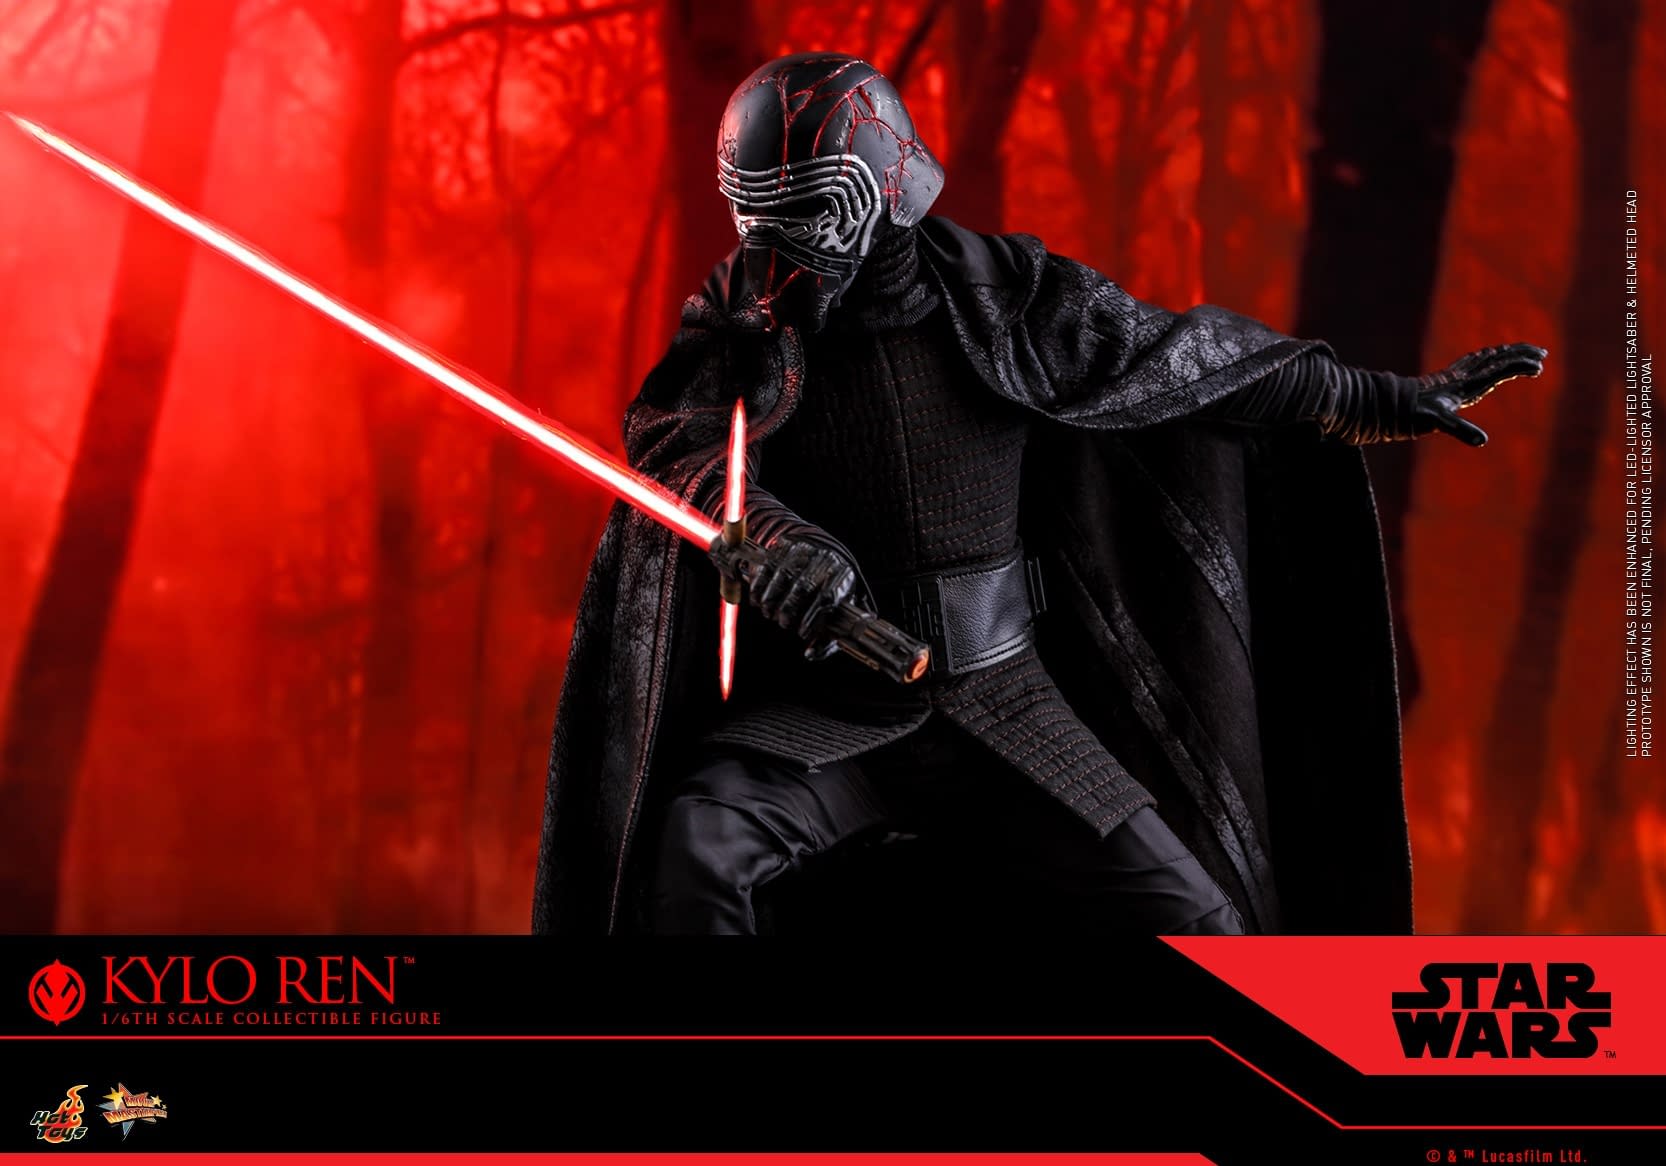 Kylo Ren Prepares for the Rise of Skywalker with Hot Toys